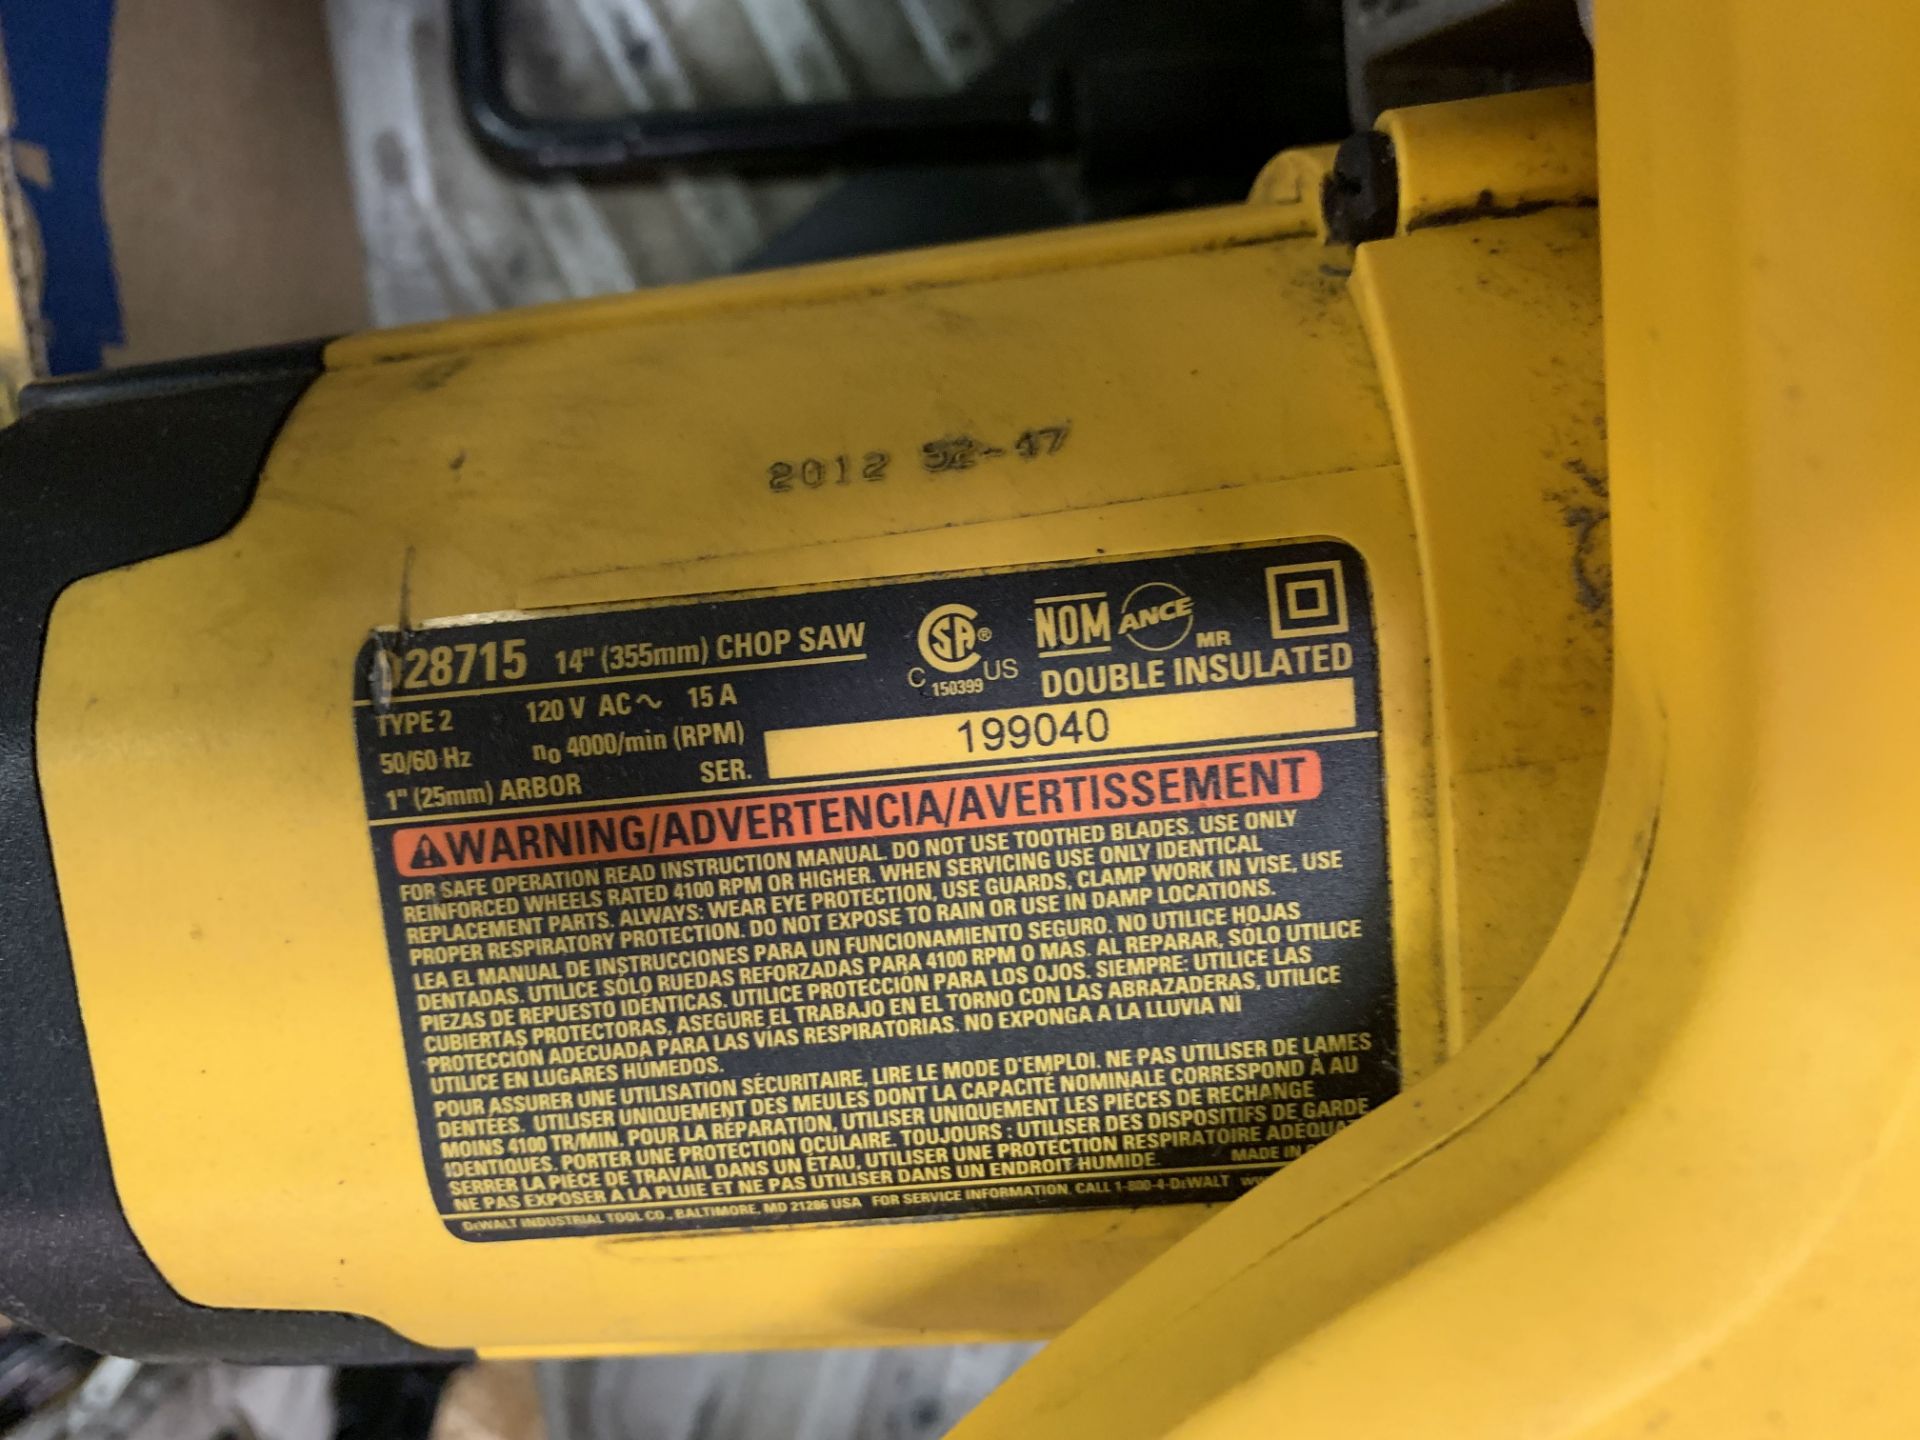 14" DEWALT MODEL D28715 CHOP SAW **LOCATED AT 1711 KIMBERLY PARK DRIVE** - Image 2 of 2